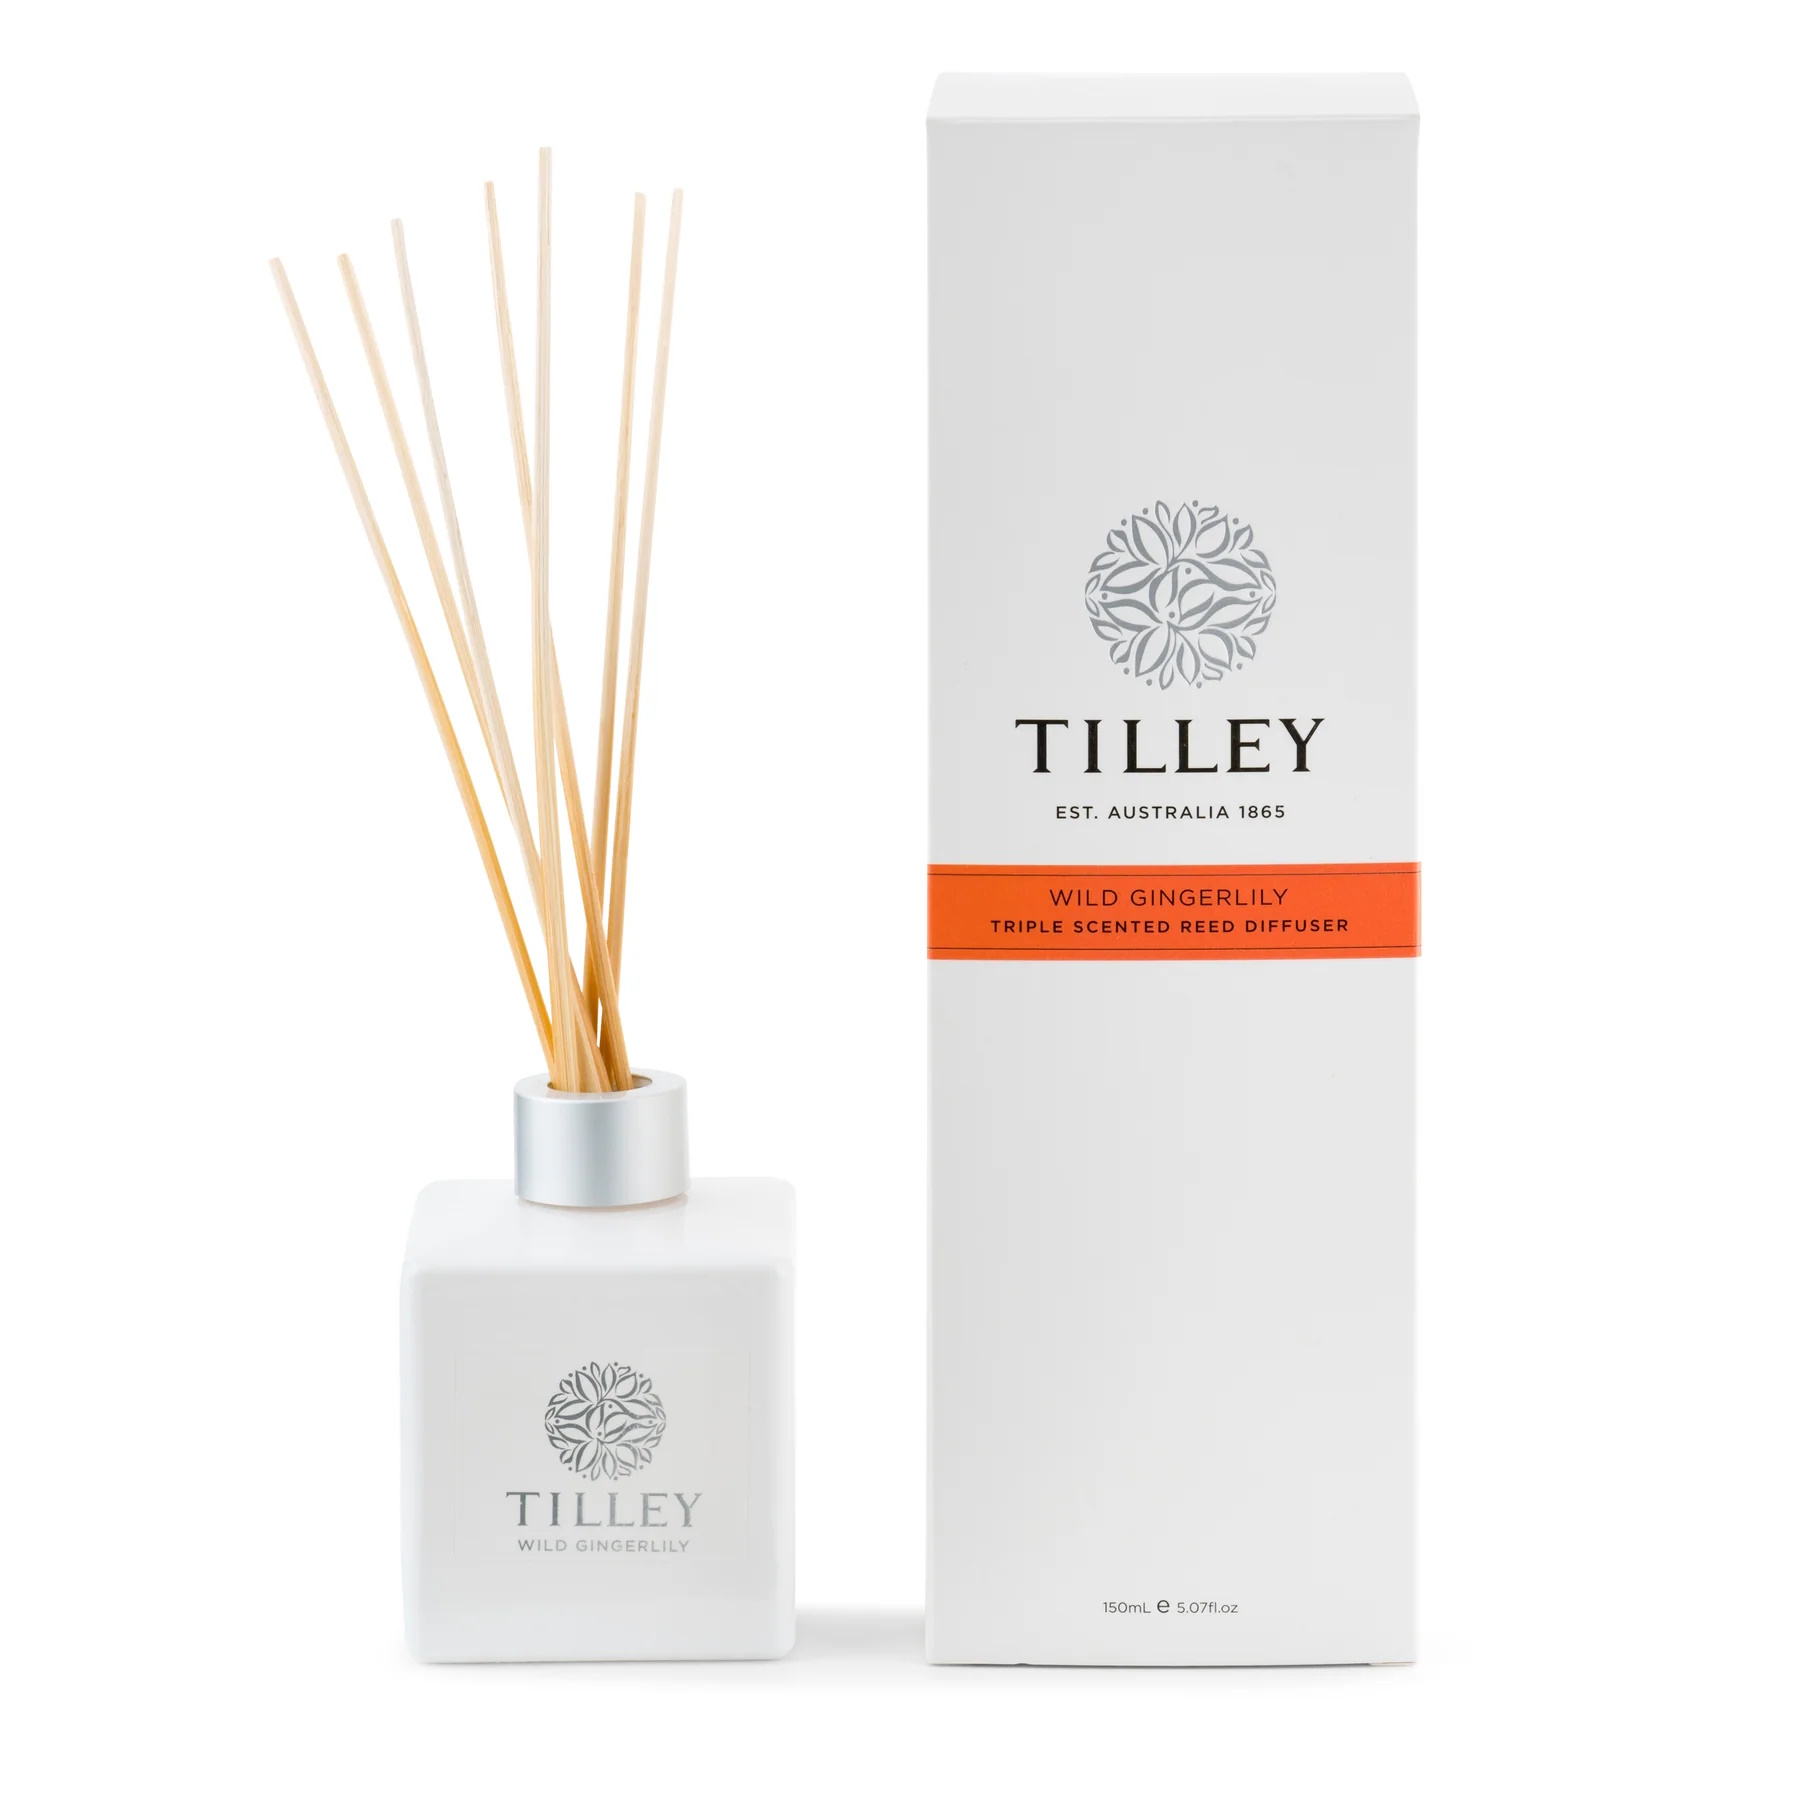 Tilley Classic White Reed Diffuser 150ml Wild Gingerlily